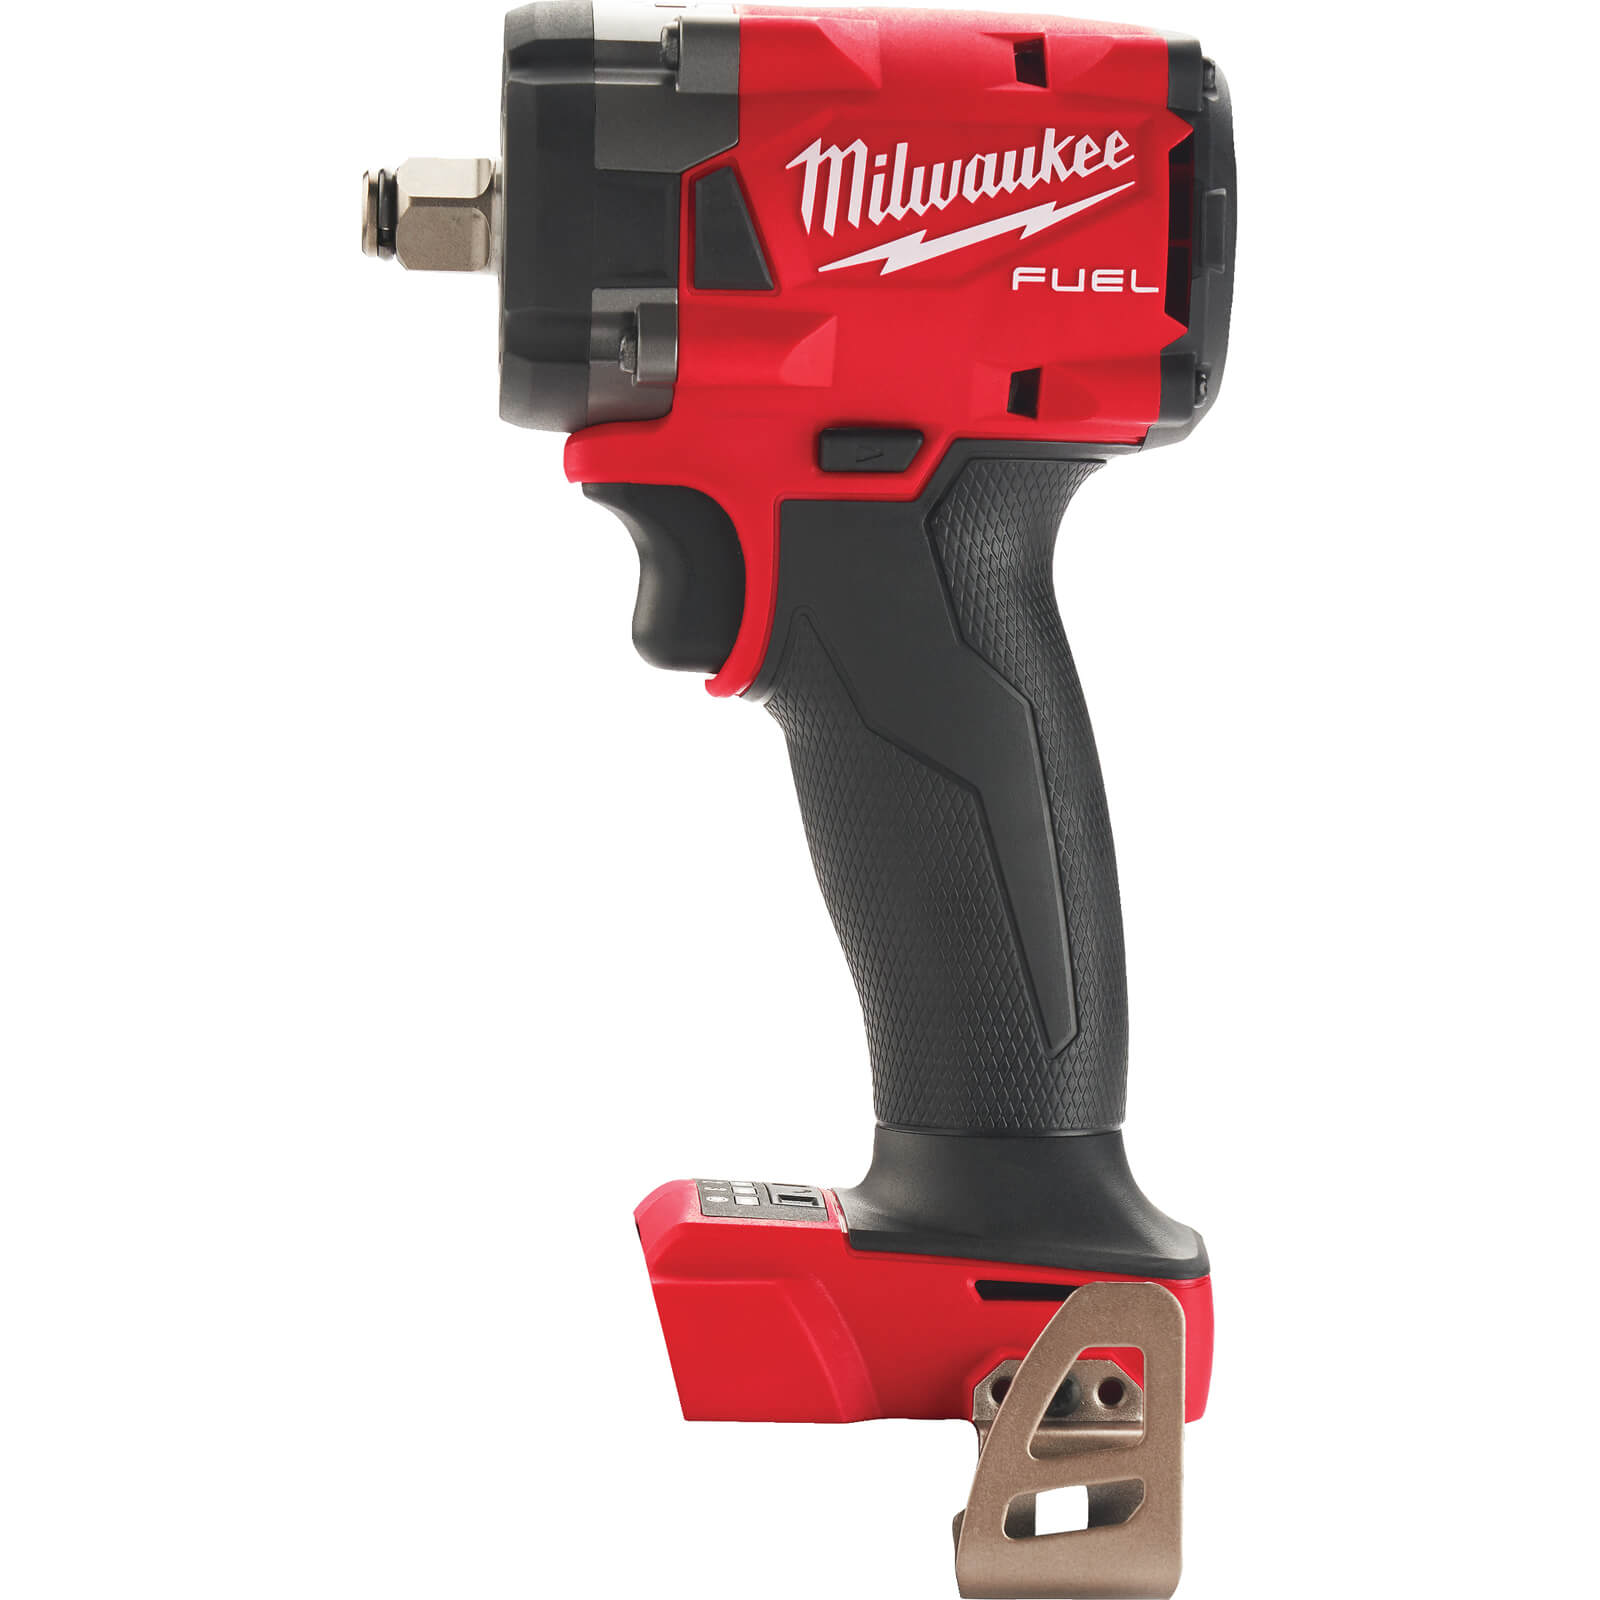 Milwaukee M18 FIW2F38 Fuel 18v Cordless Brushless 3/8" Drive Impact Wrench No Batteries No Charger Case